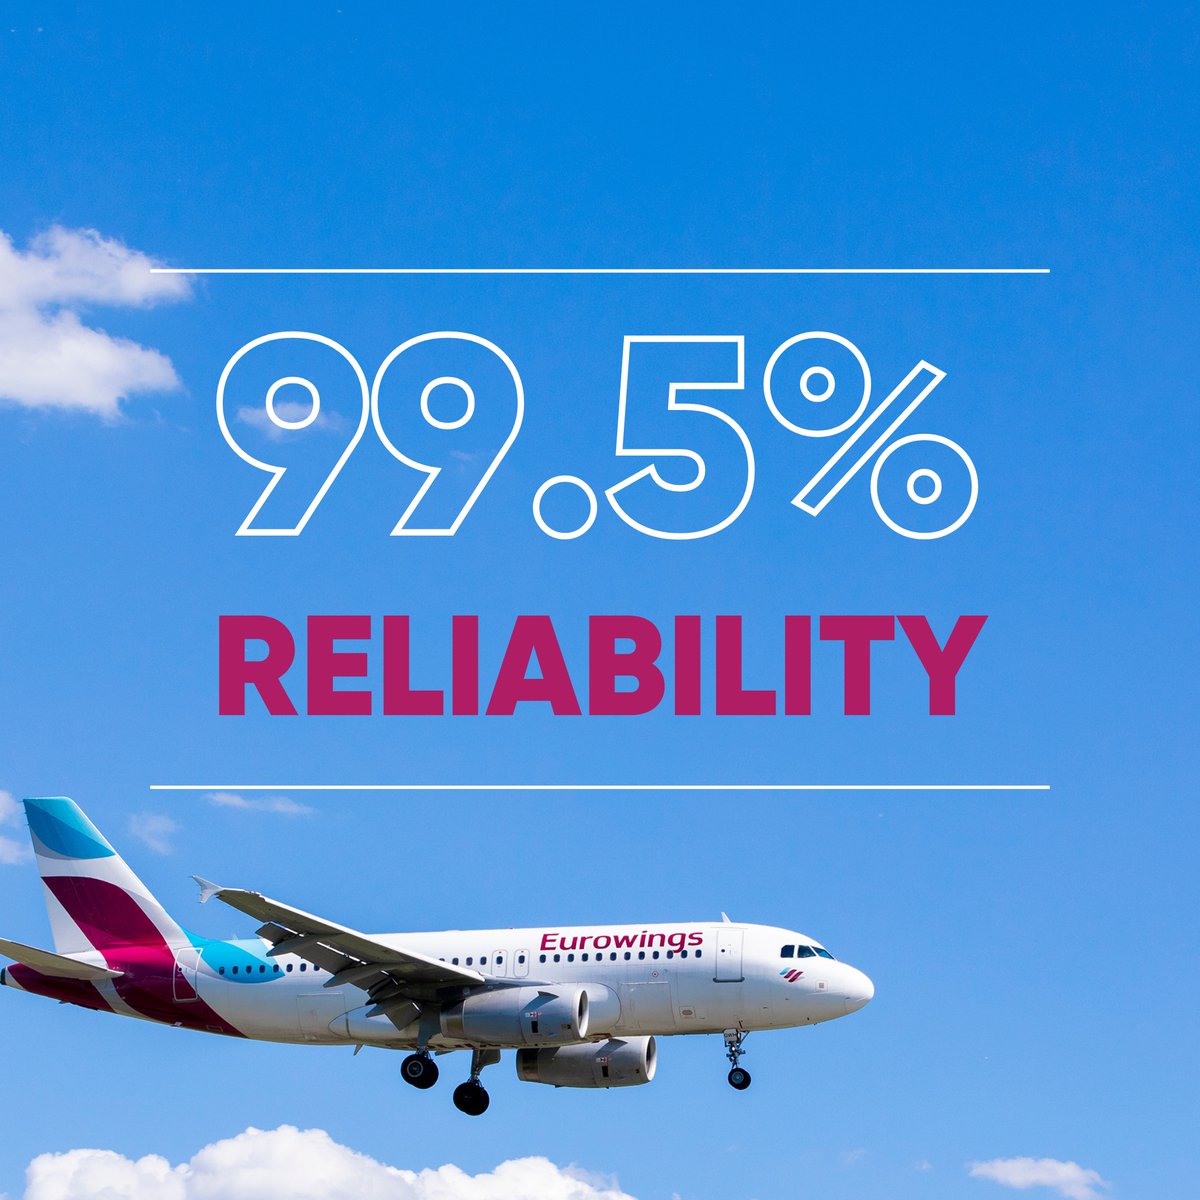 Easter recap: With a reliability of 99.5% over the long Easter weekend, we can say that almost all our 1,600 flights took off as planned. 🙌